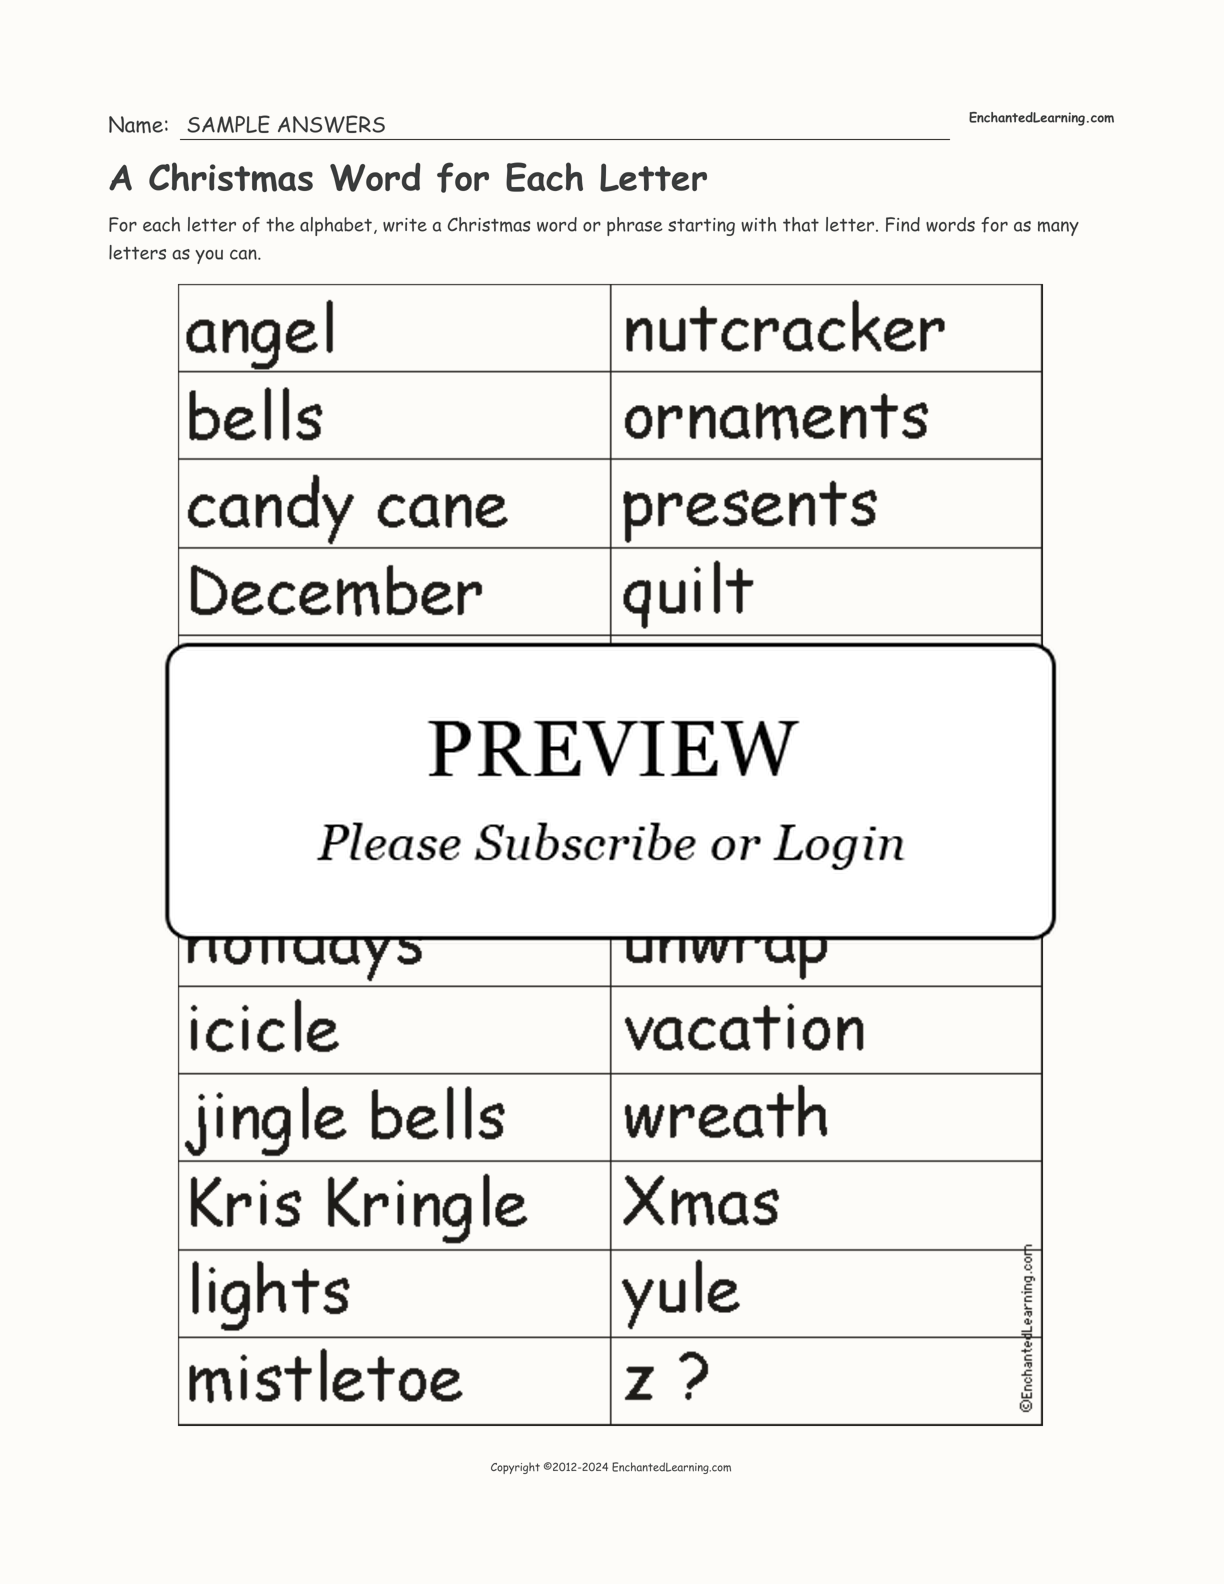 A Christmas Word for Each Letter interactive worksheet page 2